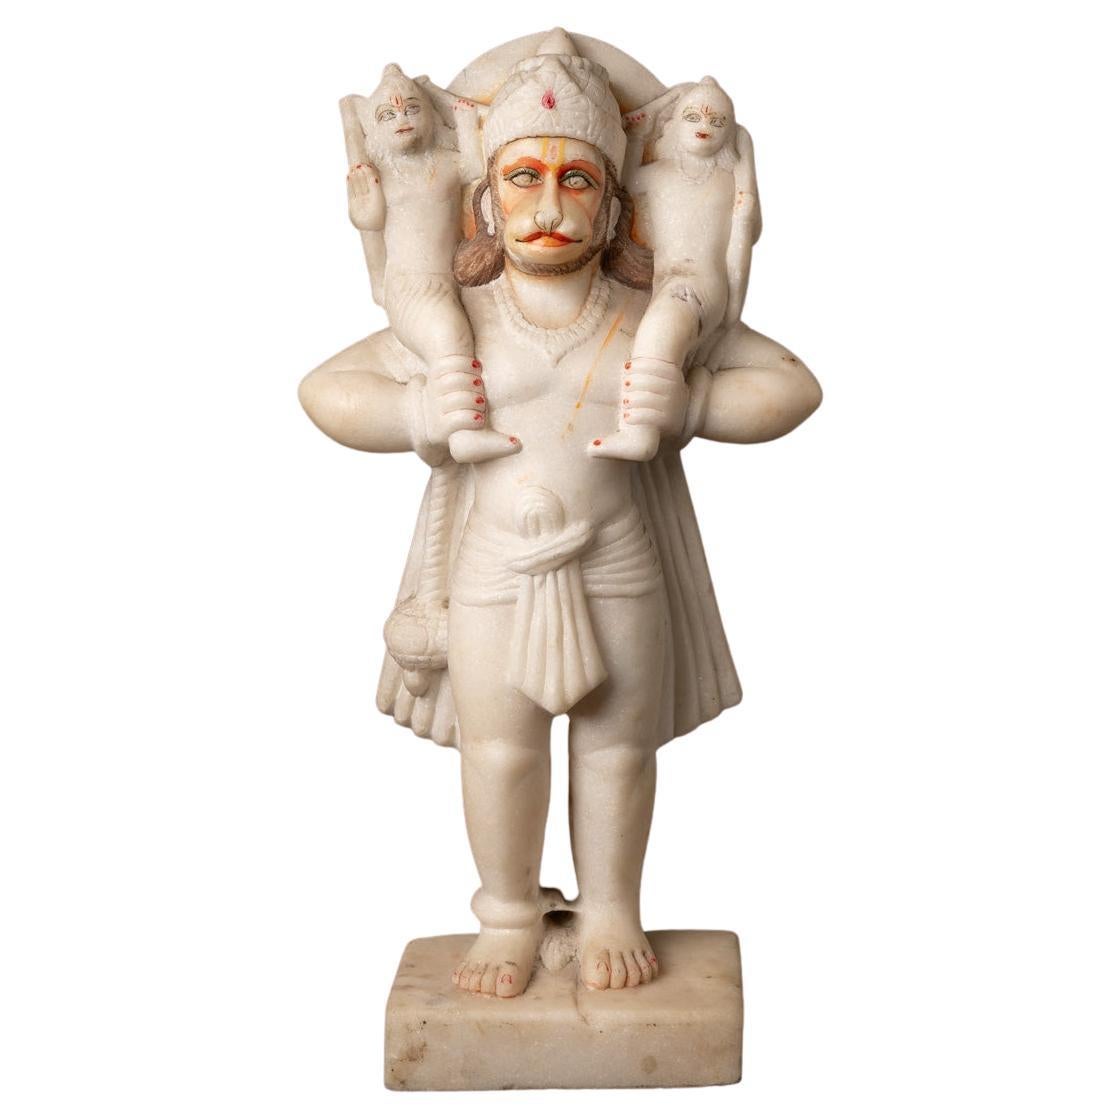 Middle 20th century old marble Hanuman statue from India - Original Buddhas For Sale